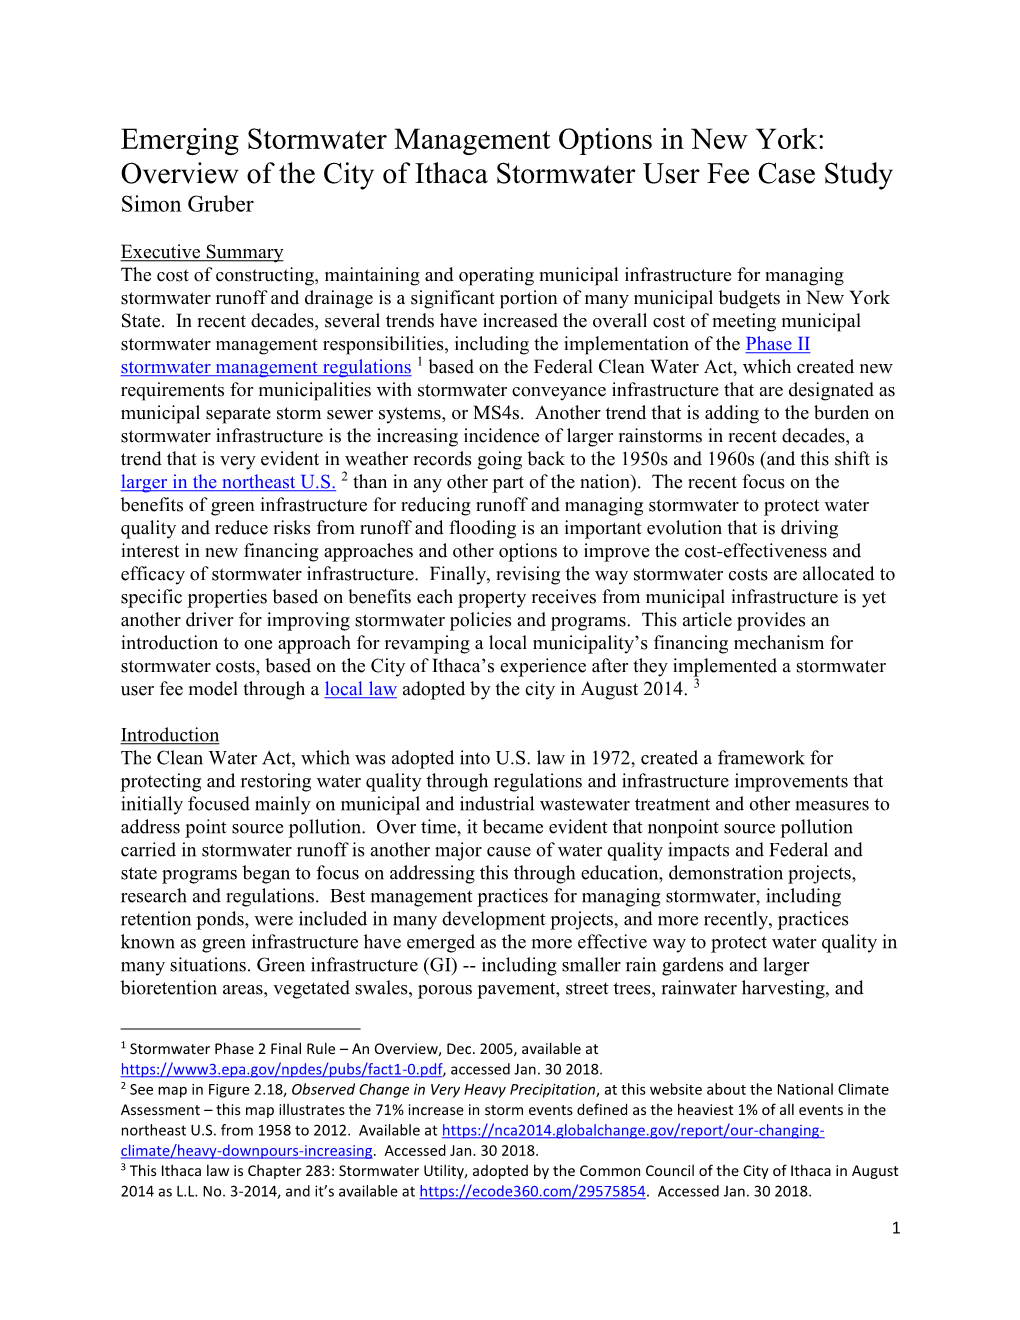 Overview of the City of Ithaca Stormwater User Fee Case Study Simon Gruber